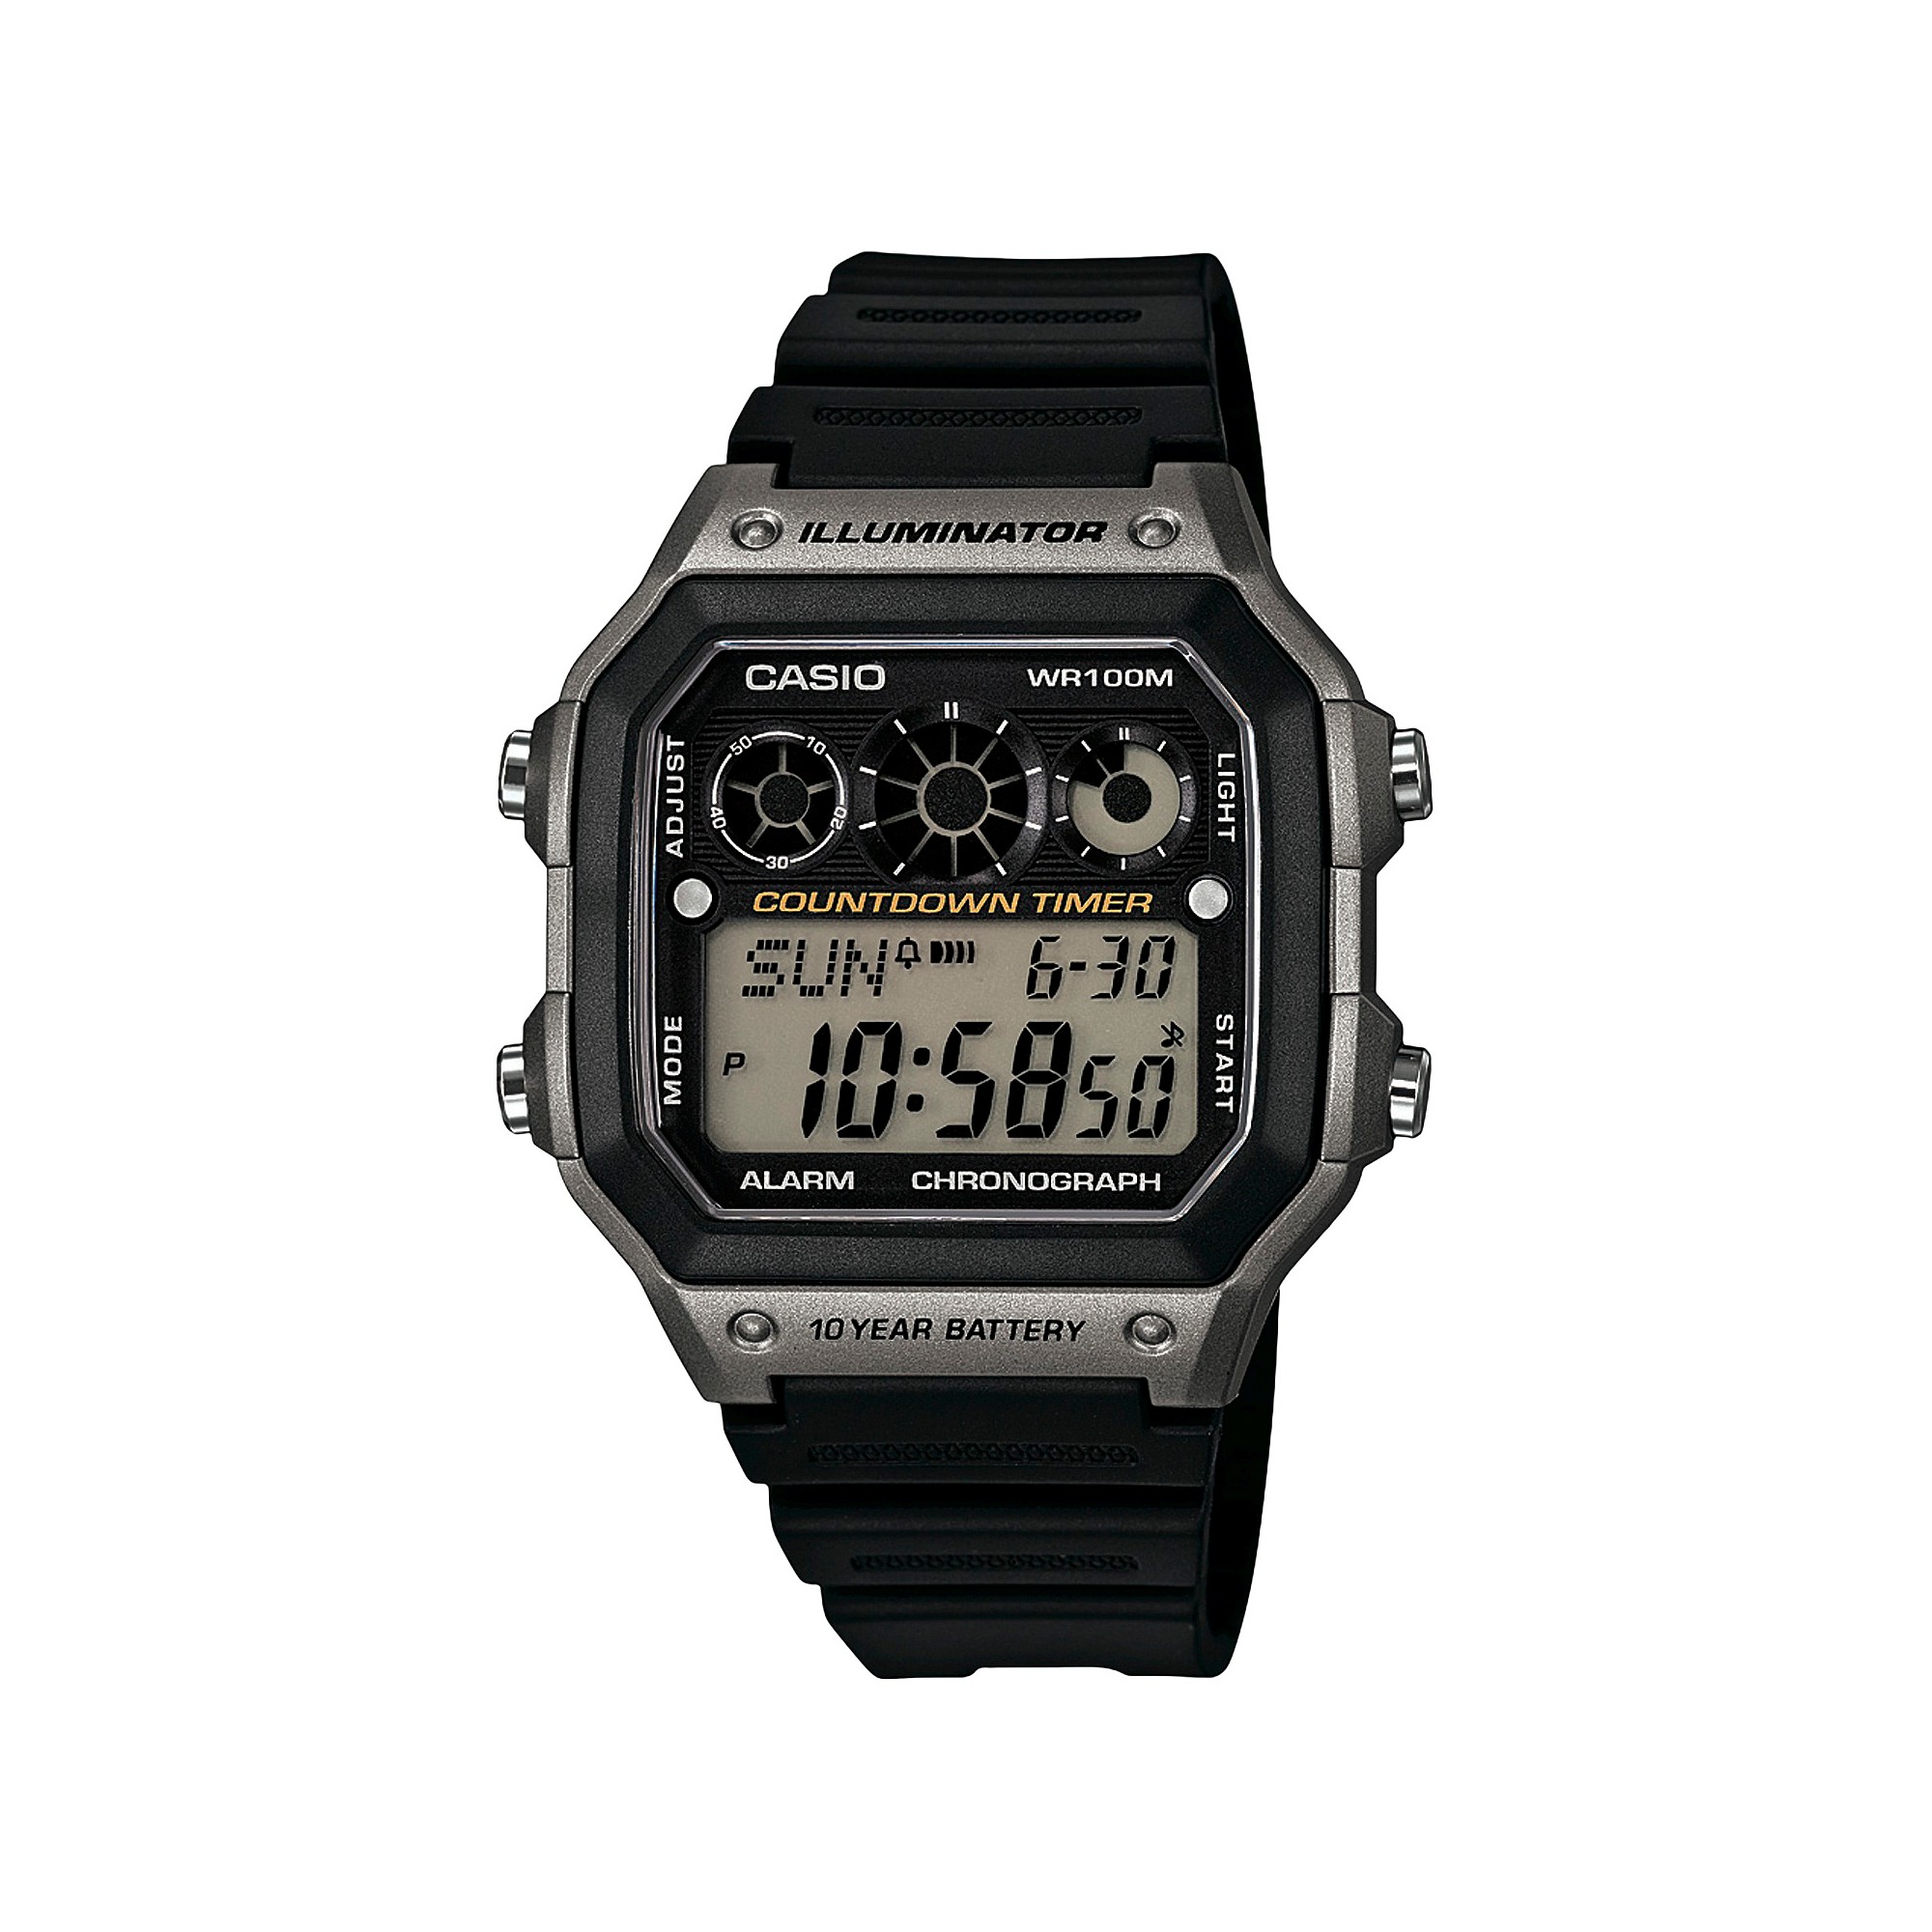 Men's Casio Classic Digital Watch with Gray Accents - Black (AE1300WH-8AVCF), Size: Small